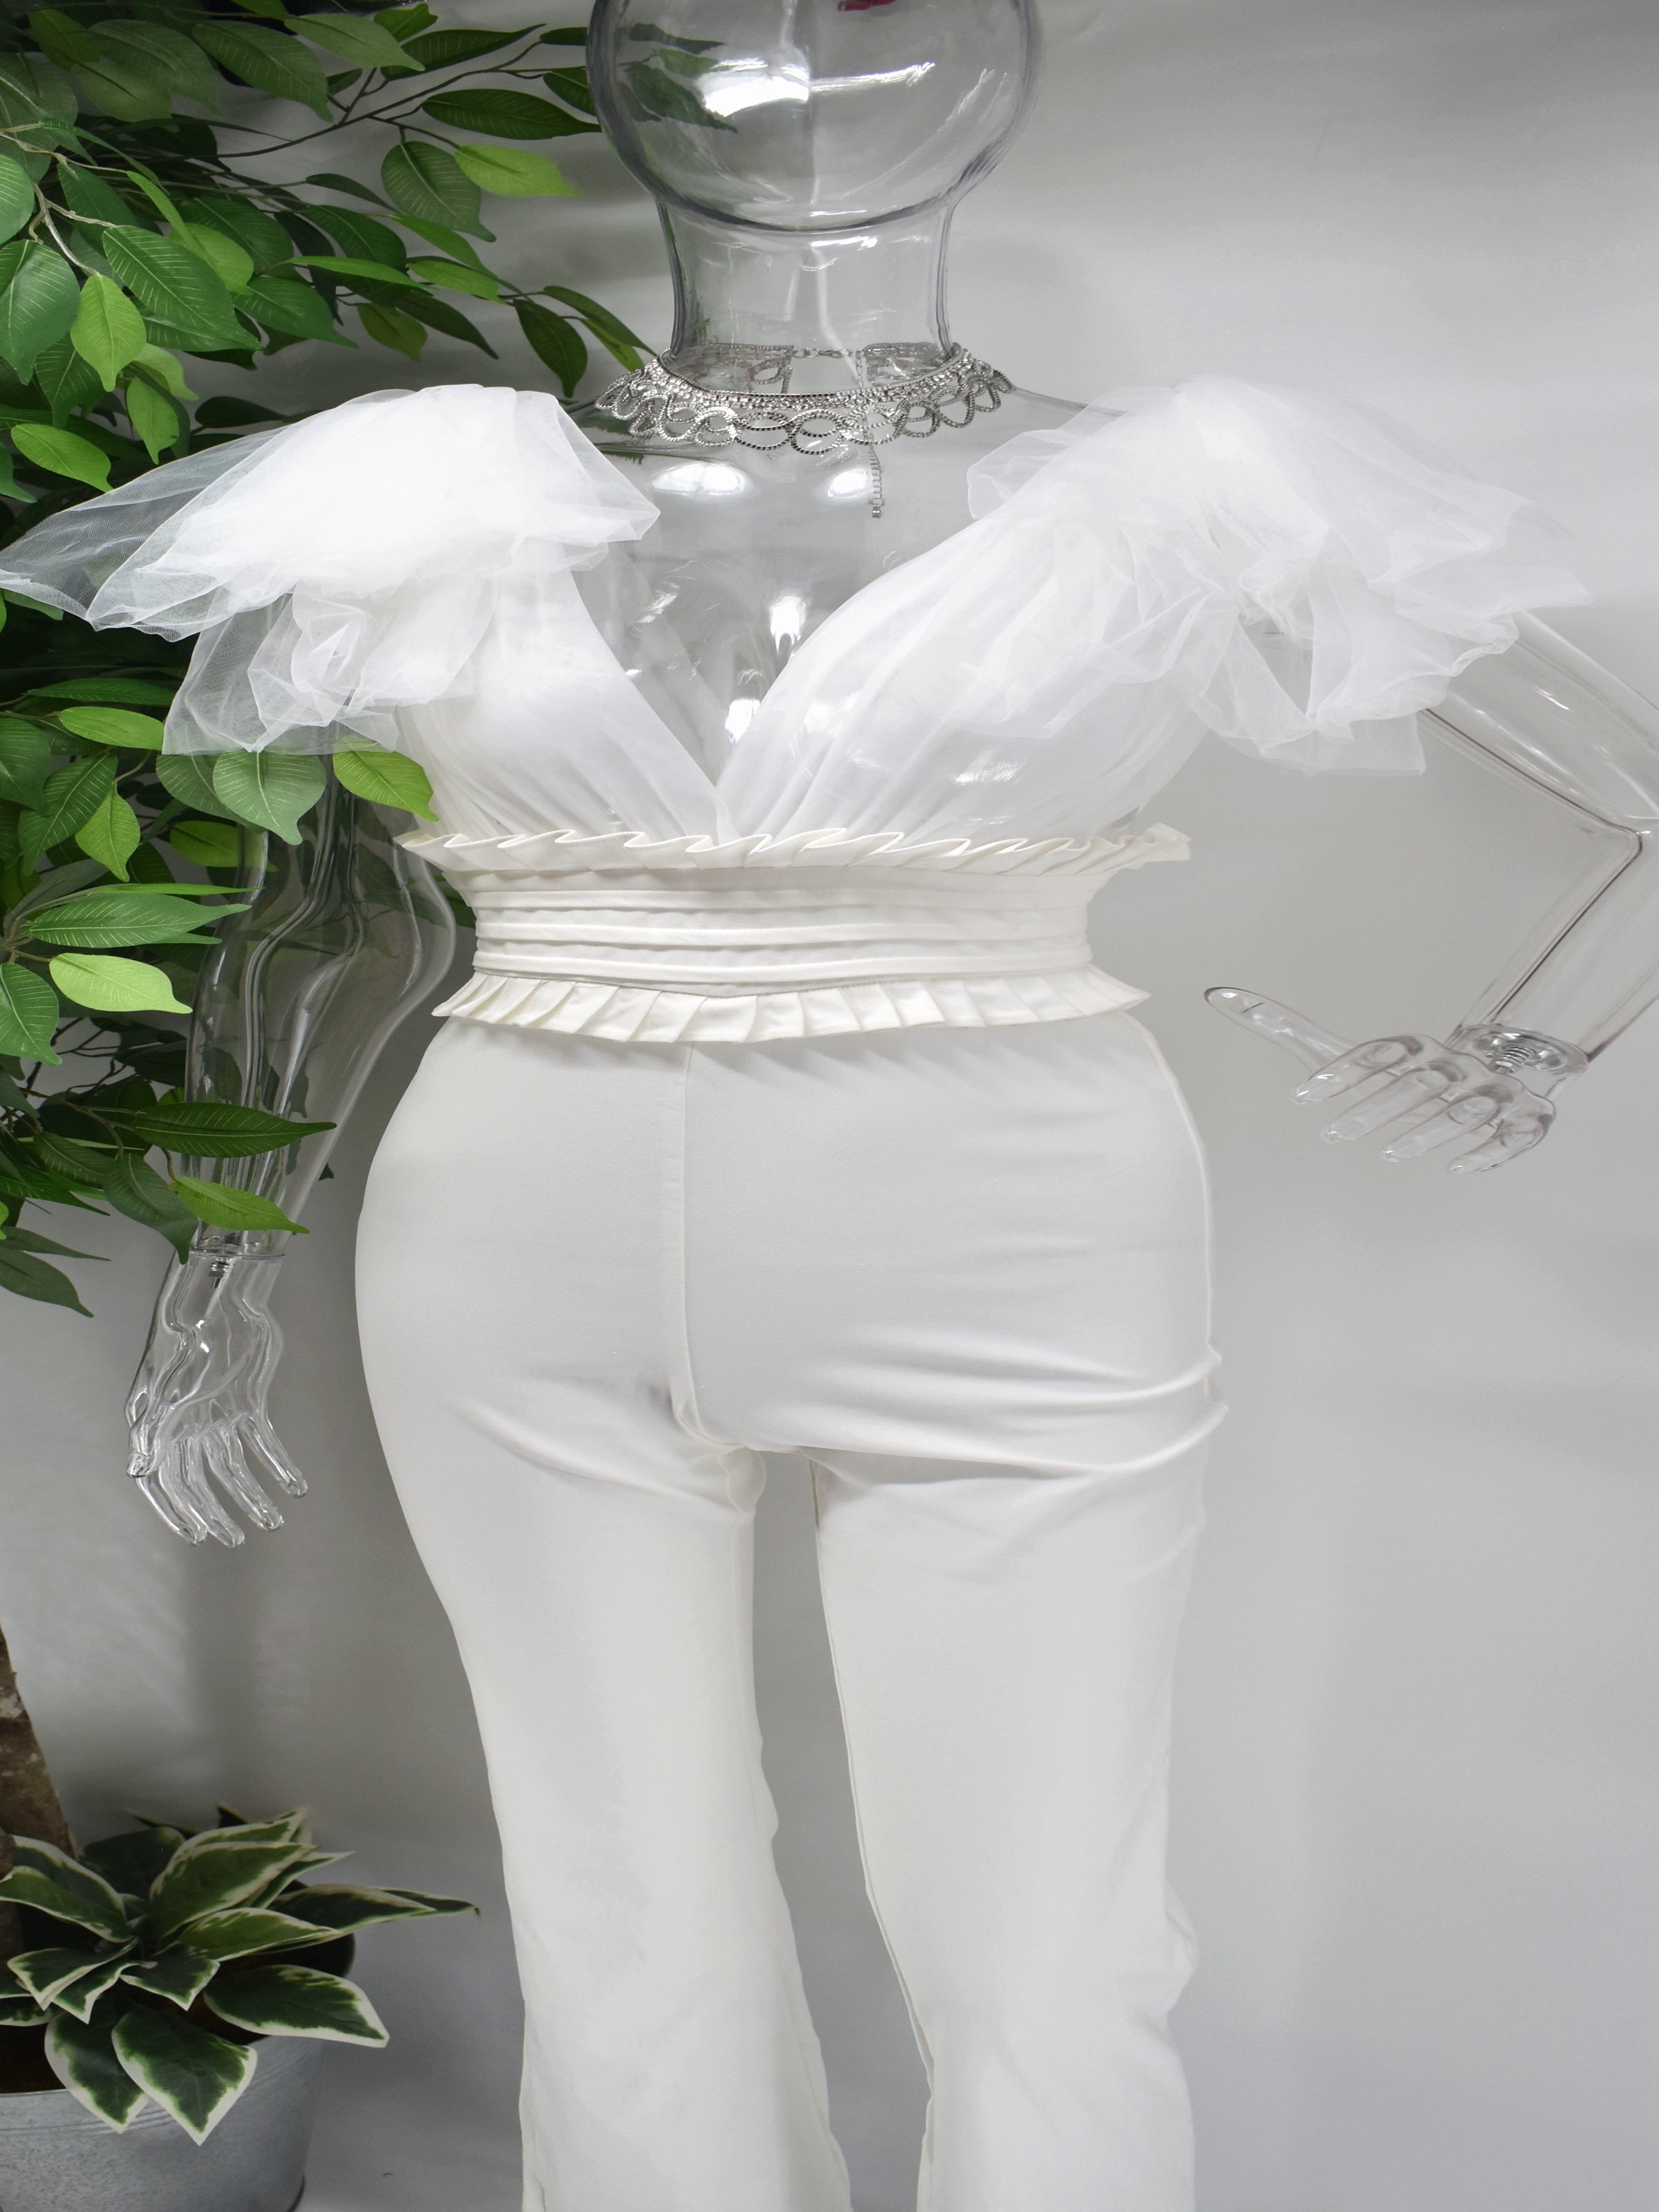 Turn heads and star the show in our Bentleigh White Jumpsuit. Bentleigh is a white pants jumpsuit with a sheer v-neckline top and a ruffled cinched waist. Its frill sheer sleeve adds just the right amount of drama without going over board.